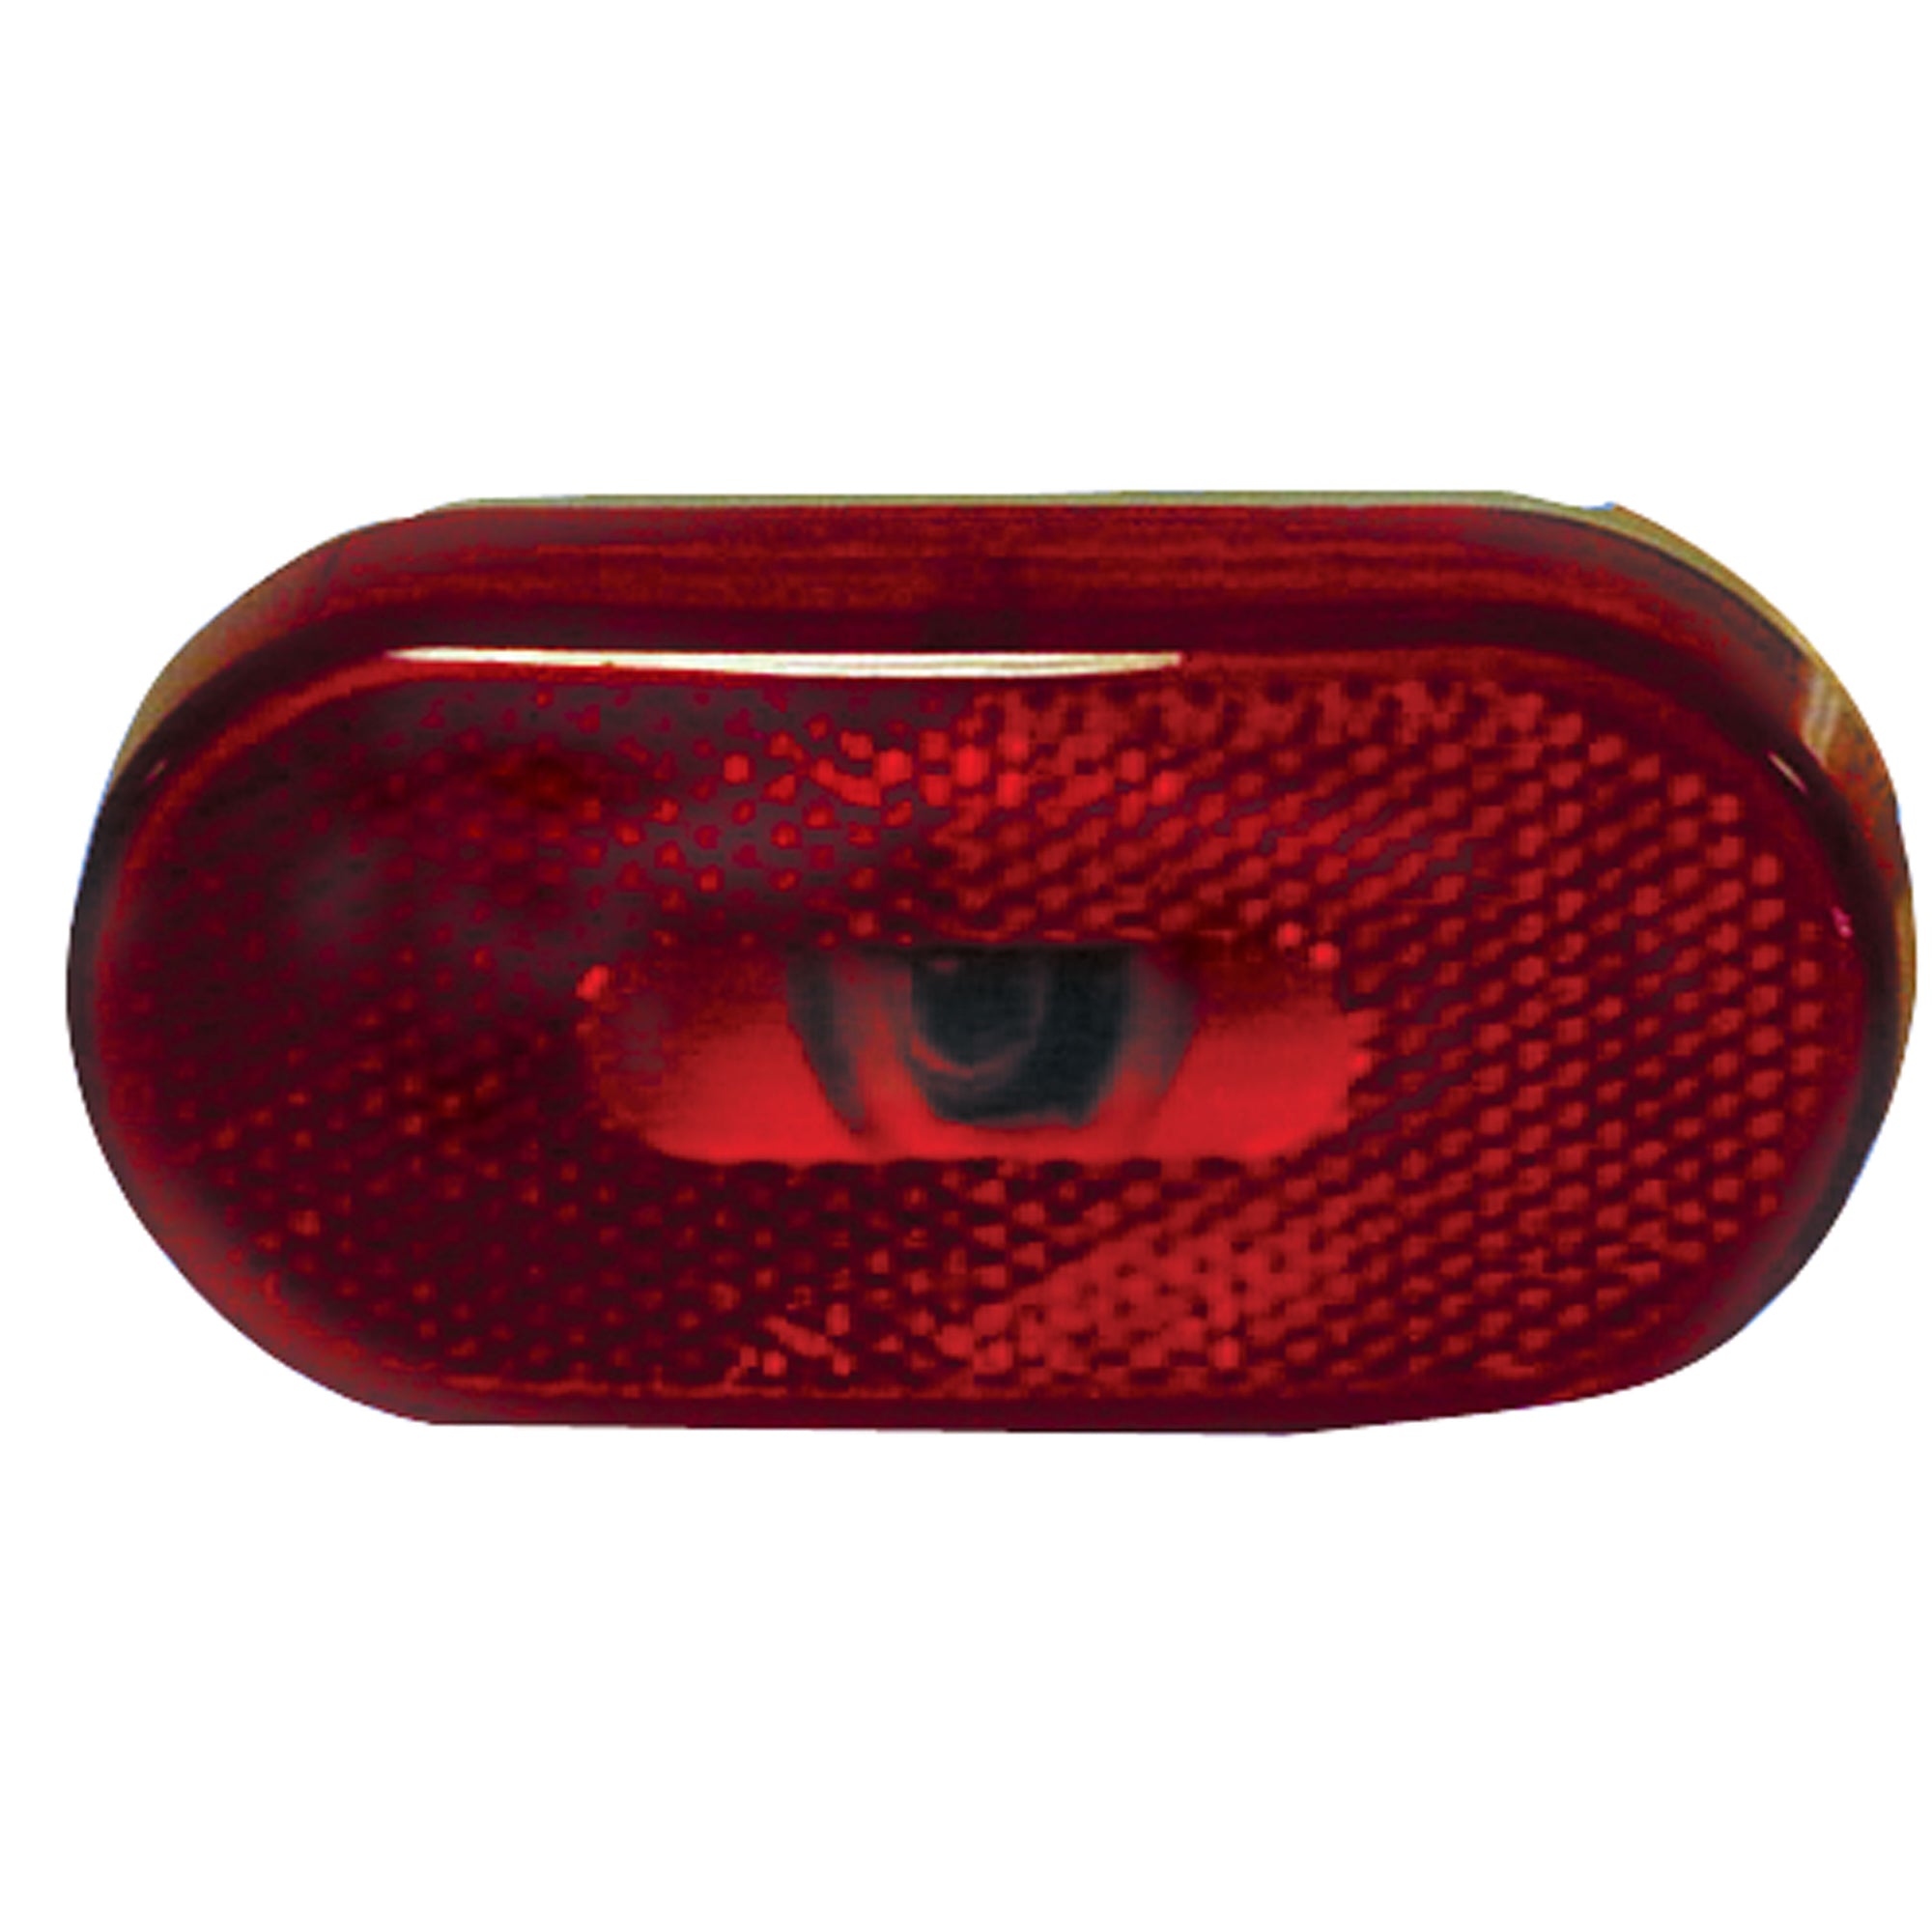 Fasteners Unlimited 89-121R Command Electronics Classic Clearance Light - Red Replacement Lens